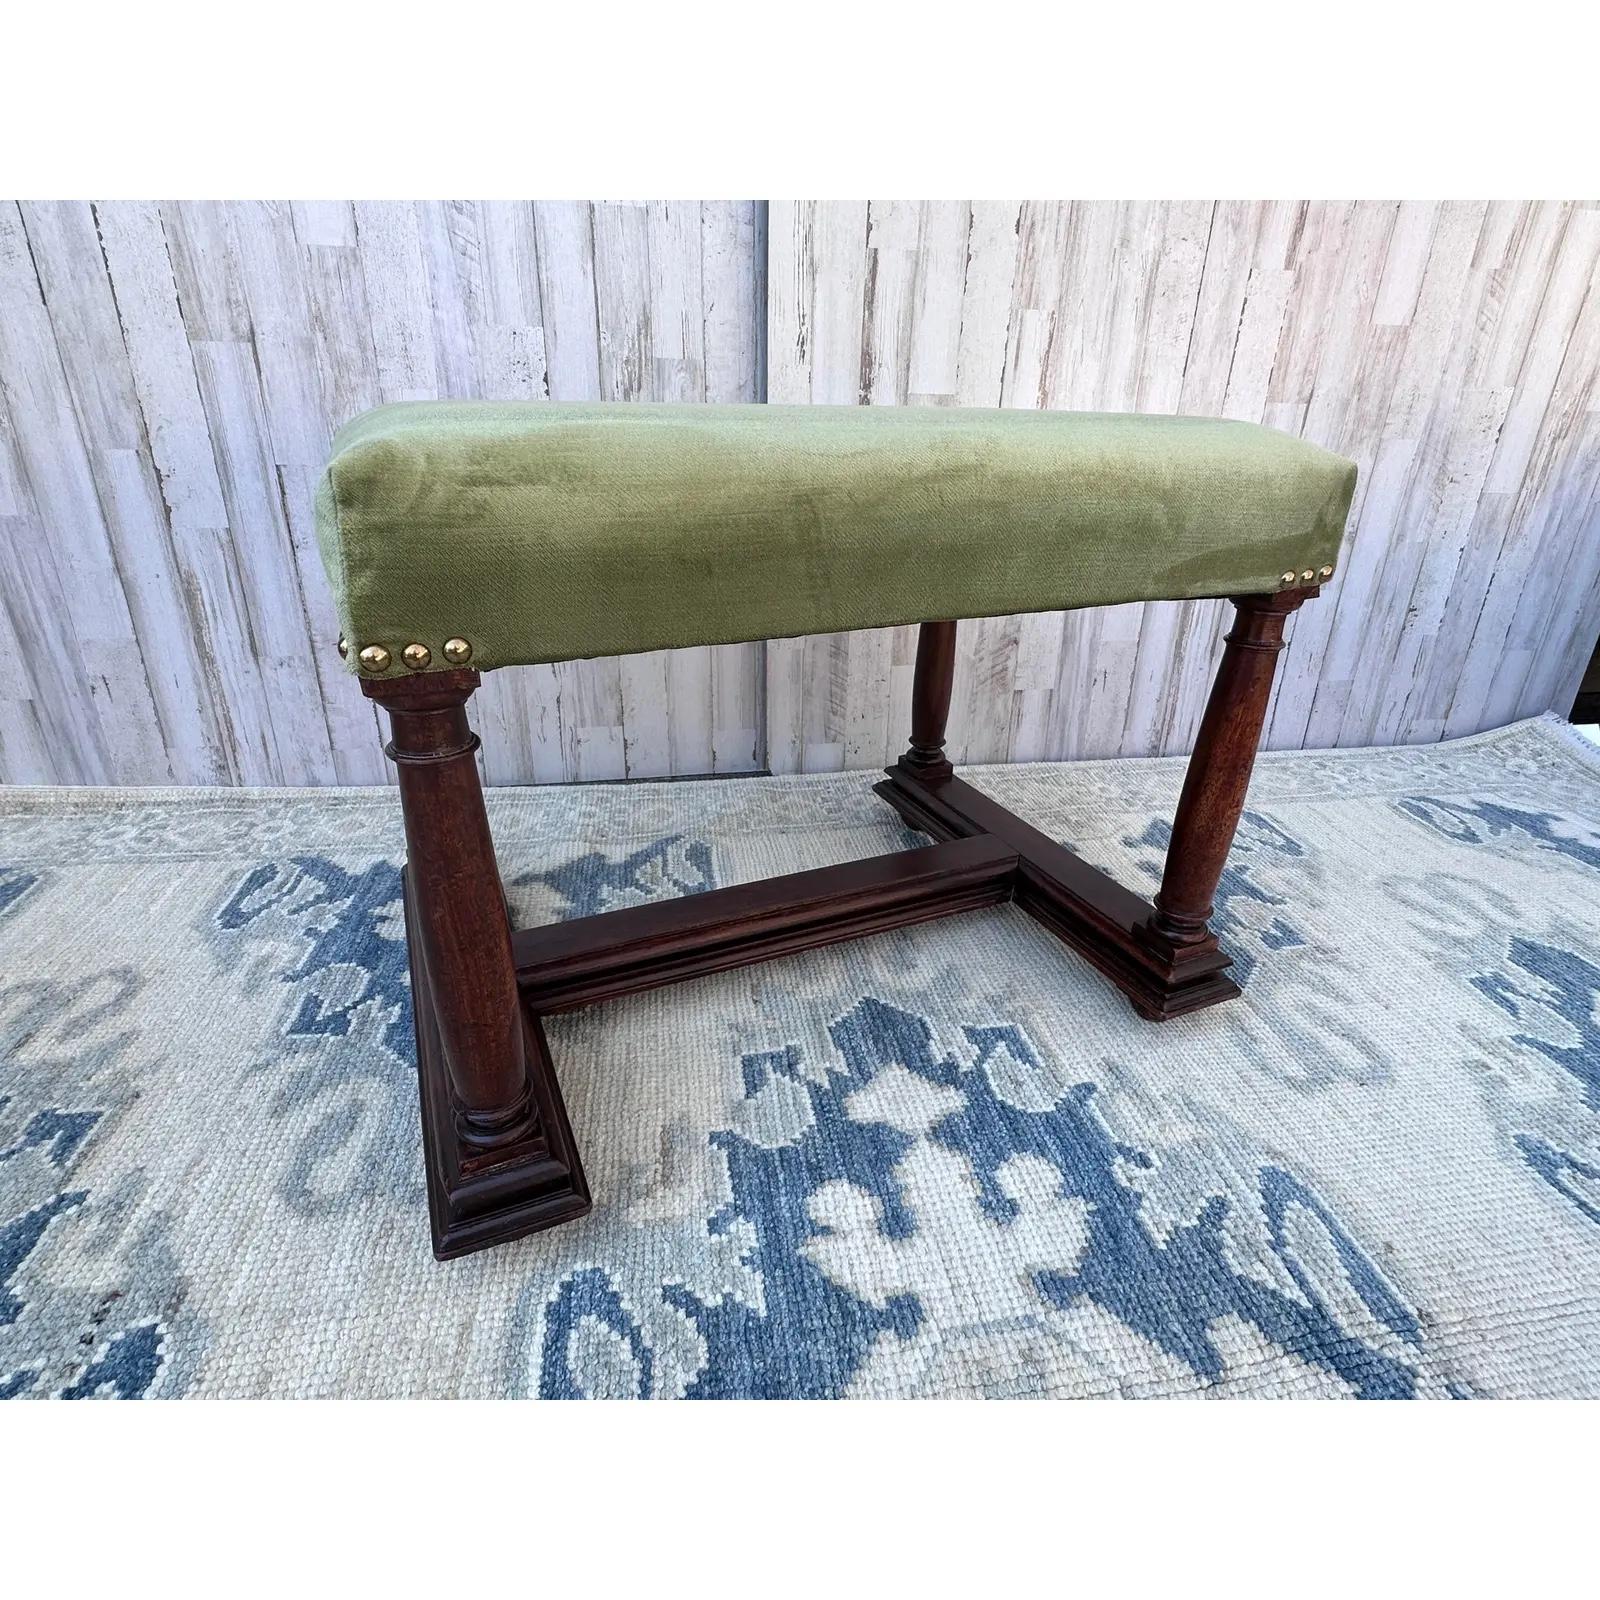 This is a pair of English benches we’ve had covered and an avocado green velvet fabric These have been extremely popular for us. People use them all over their houses as extra seating and accent pieces. 